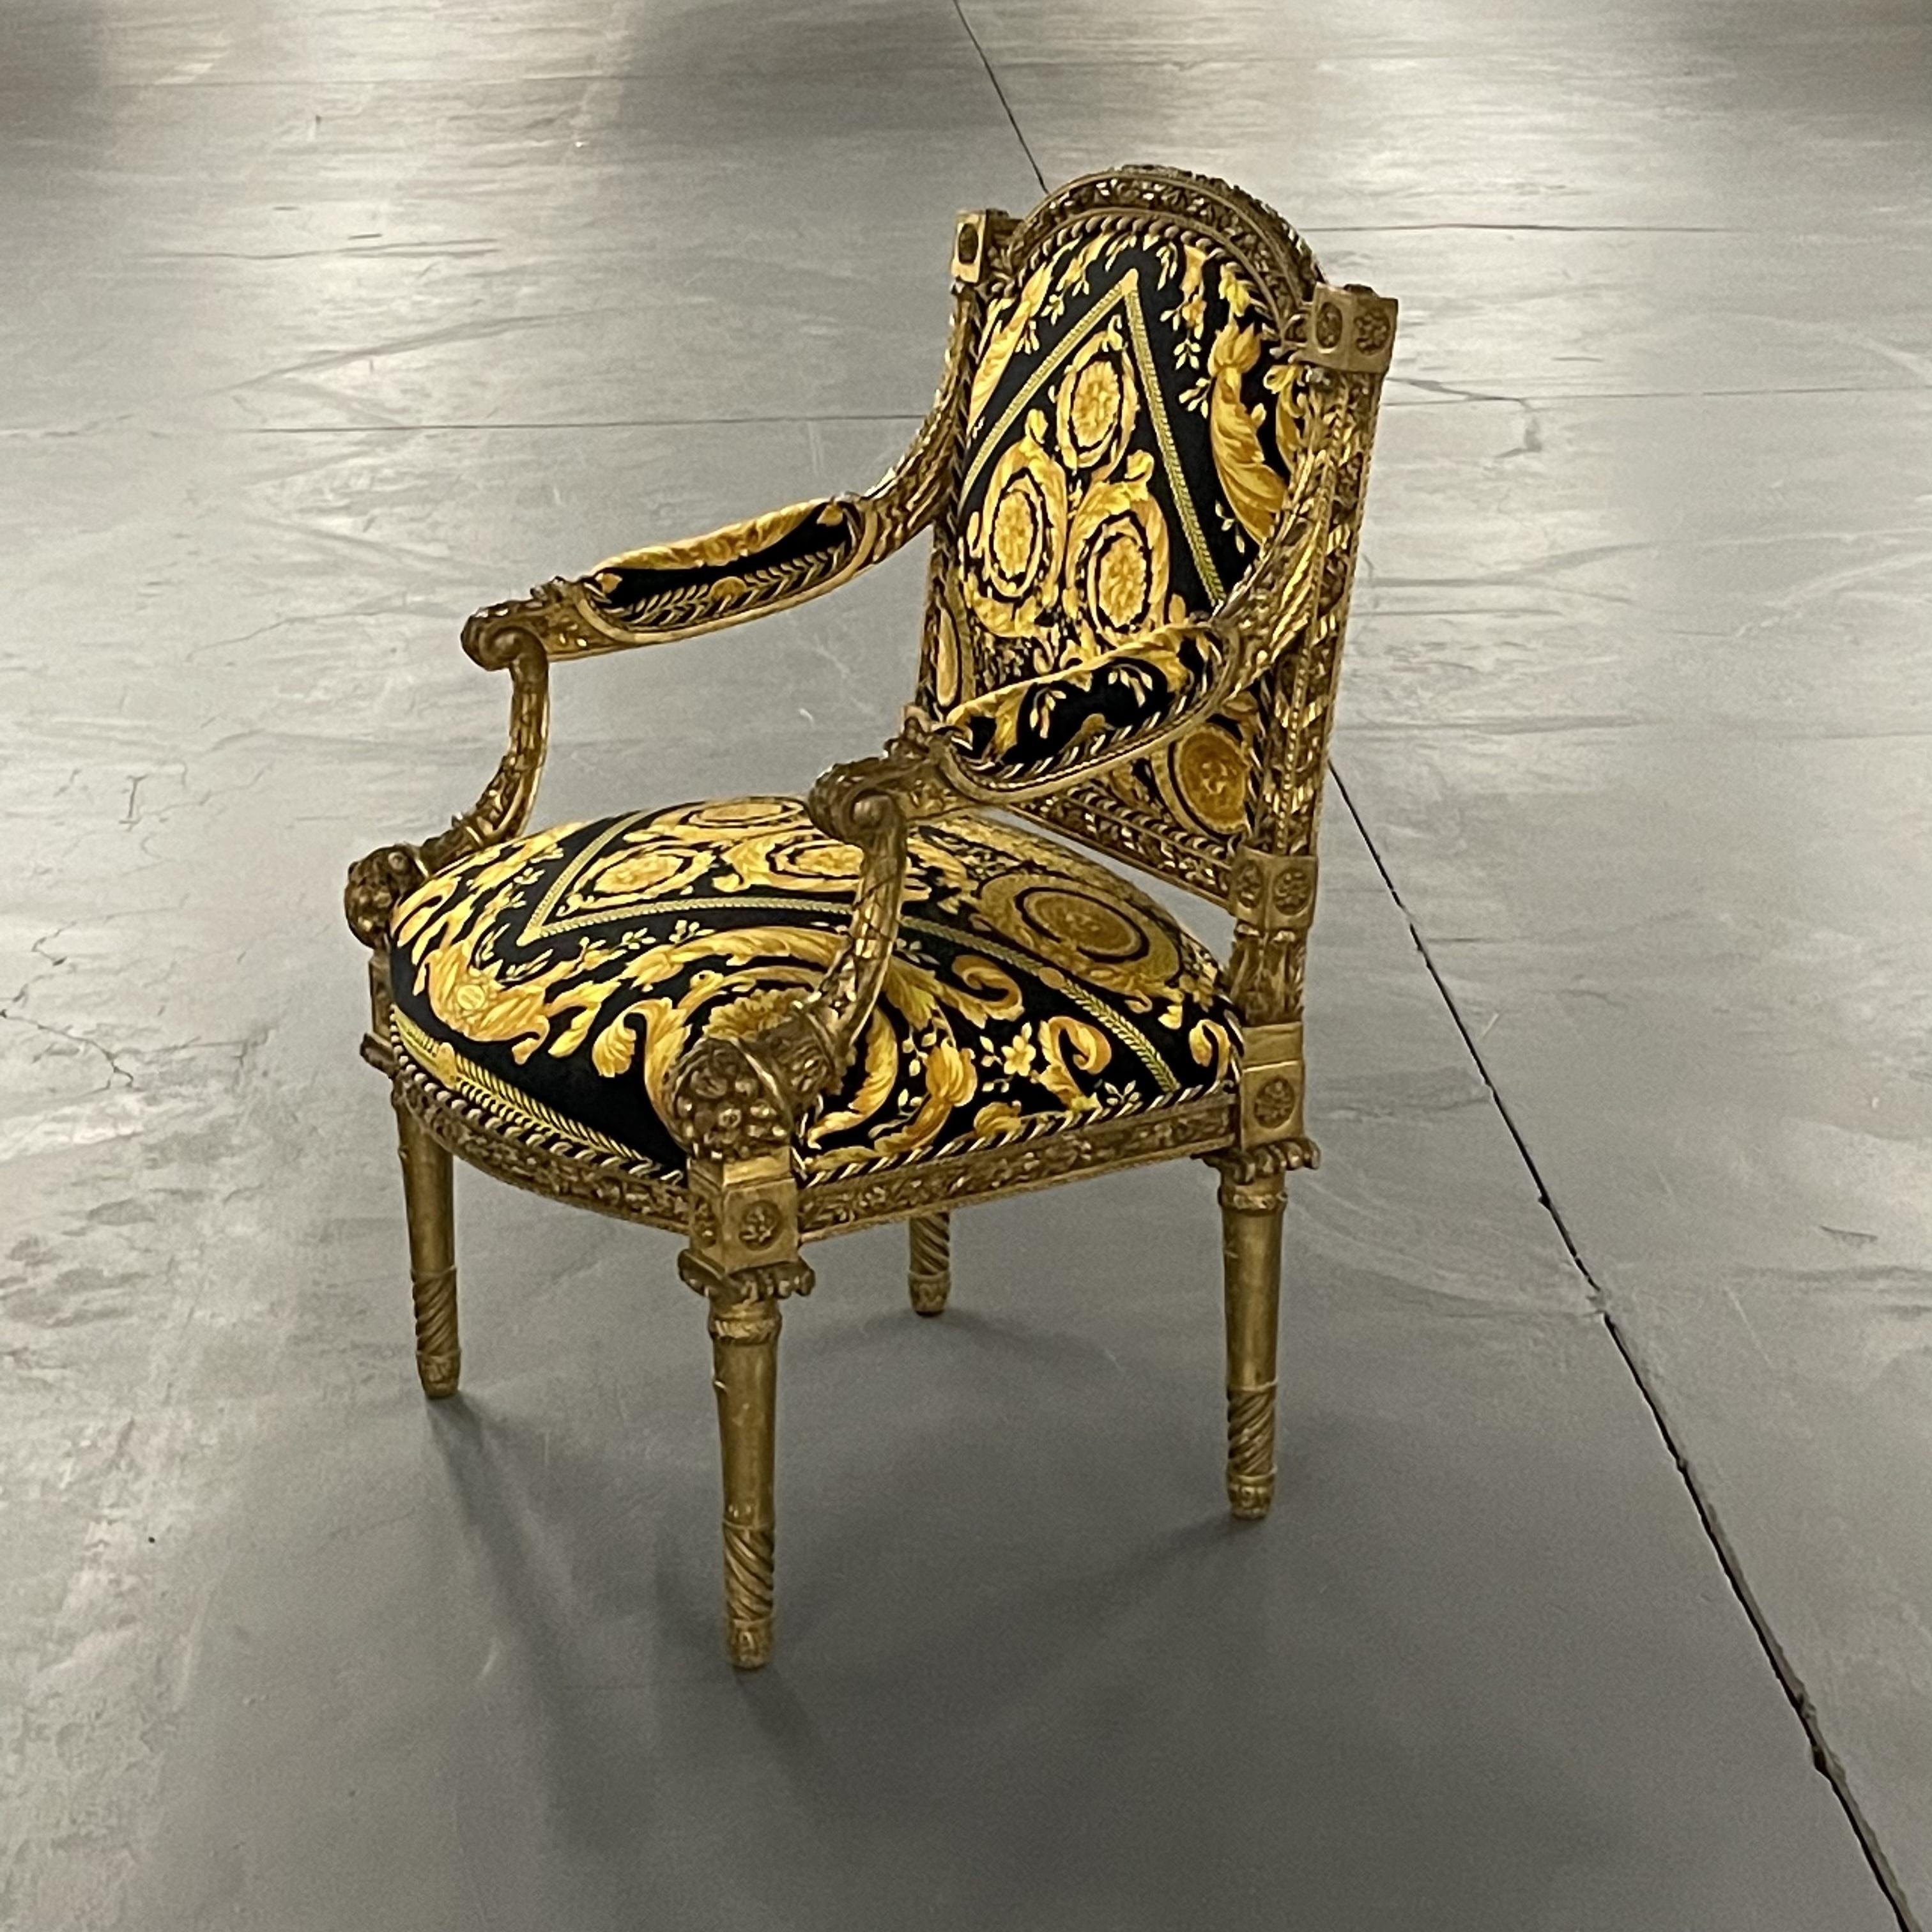 Pair of 19th-20th century Louis XVI style finely carved armchairs in Gianni Versace Fabric. These spectacular one of a kind antique walnut fauteuils or arm chairs would look breathtaking in any office or living room setting. The reeded Louis XVI